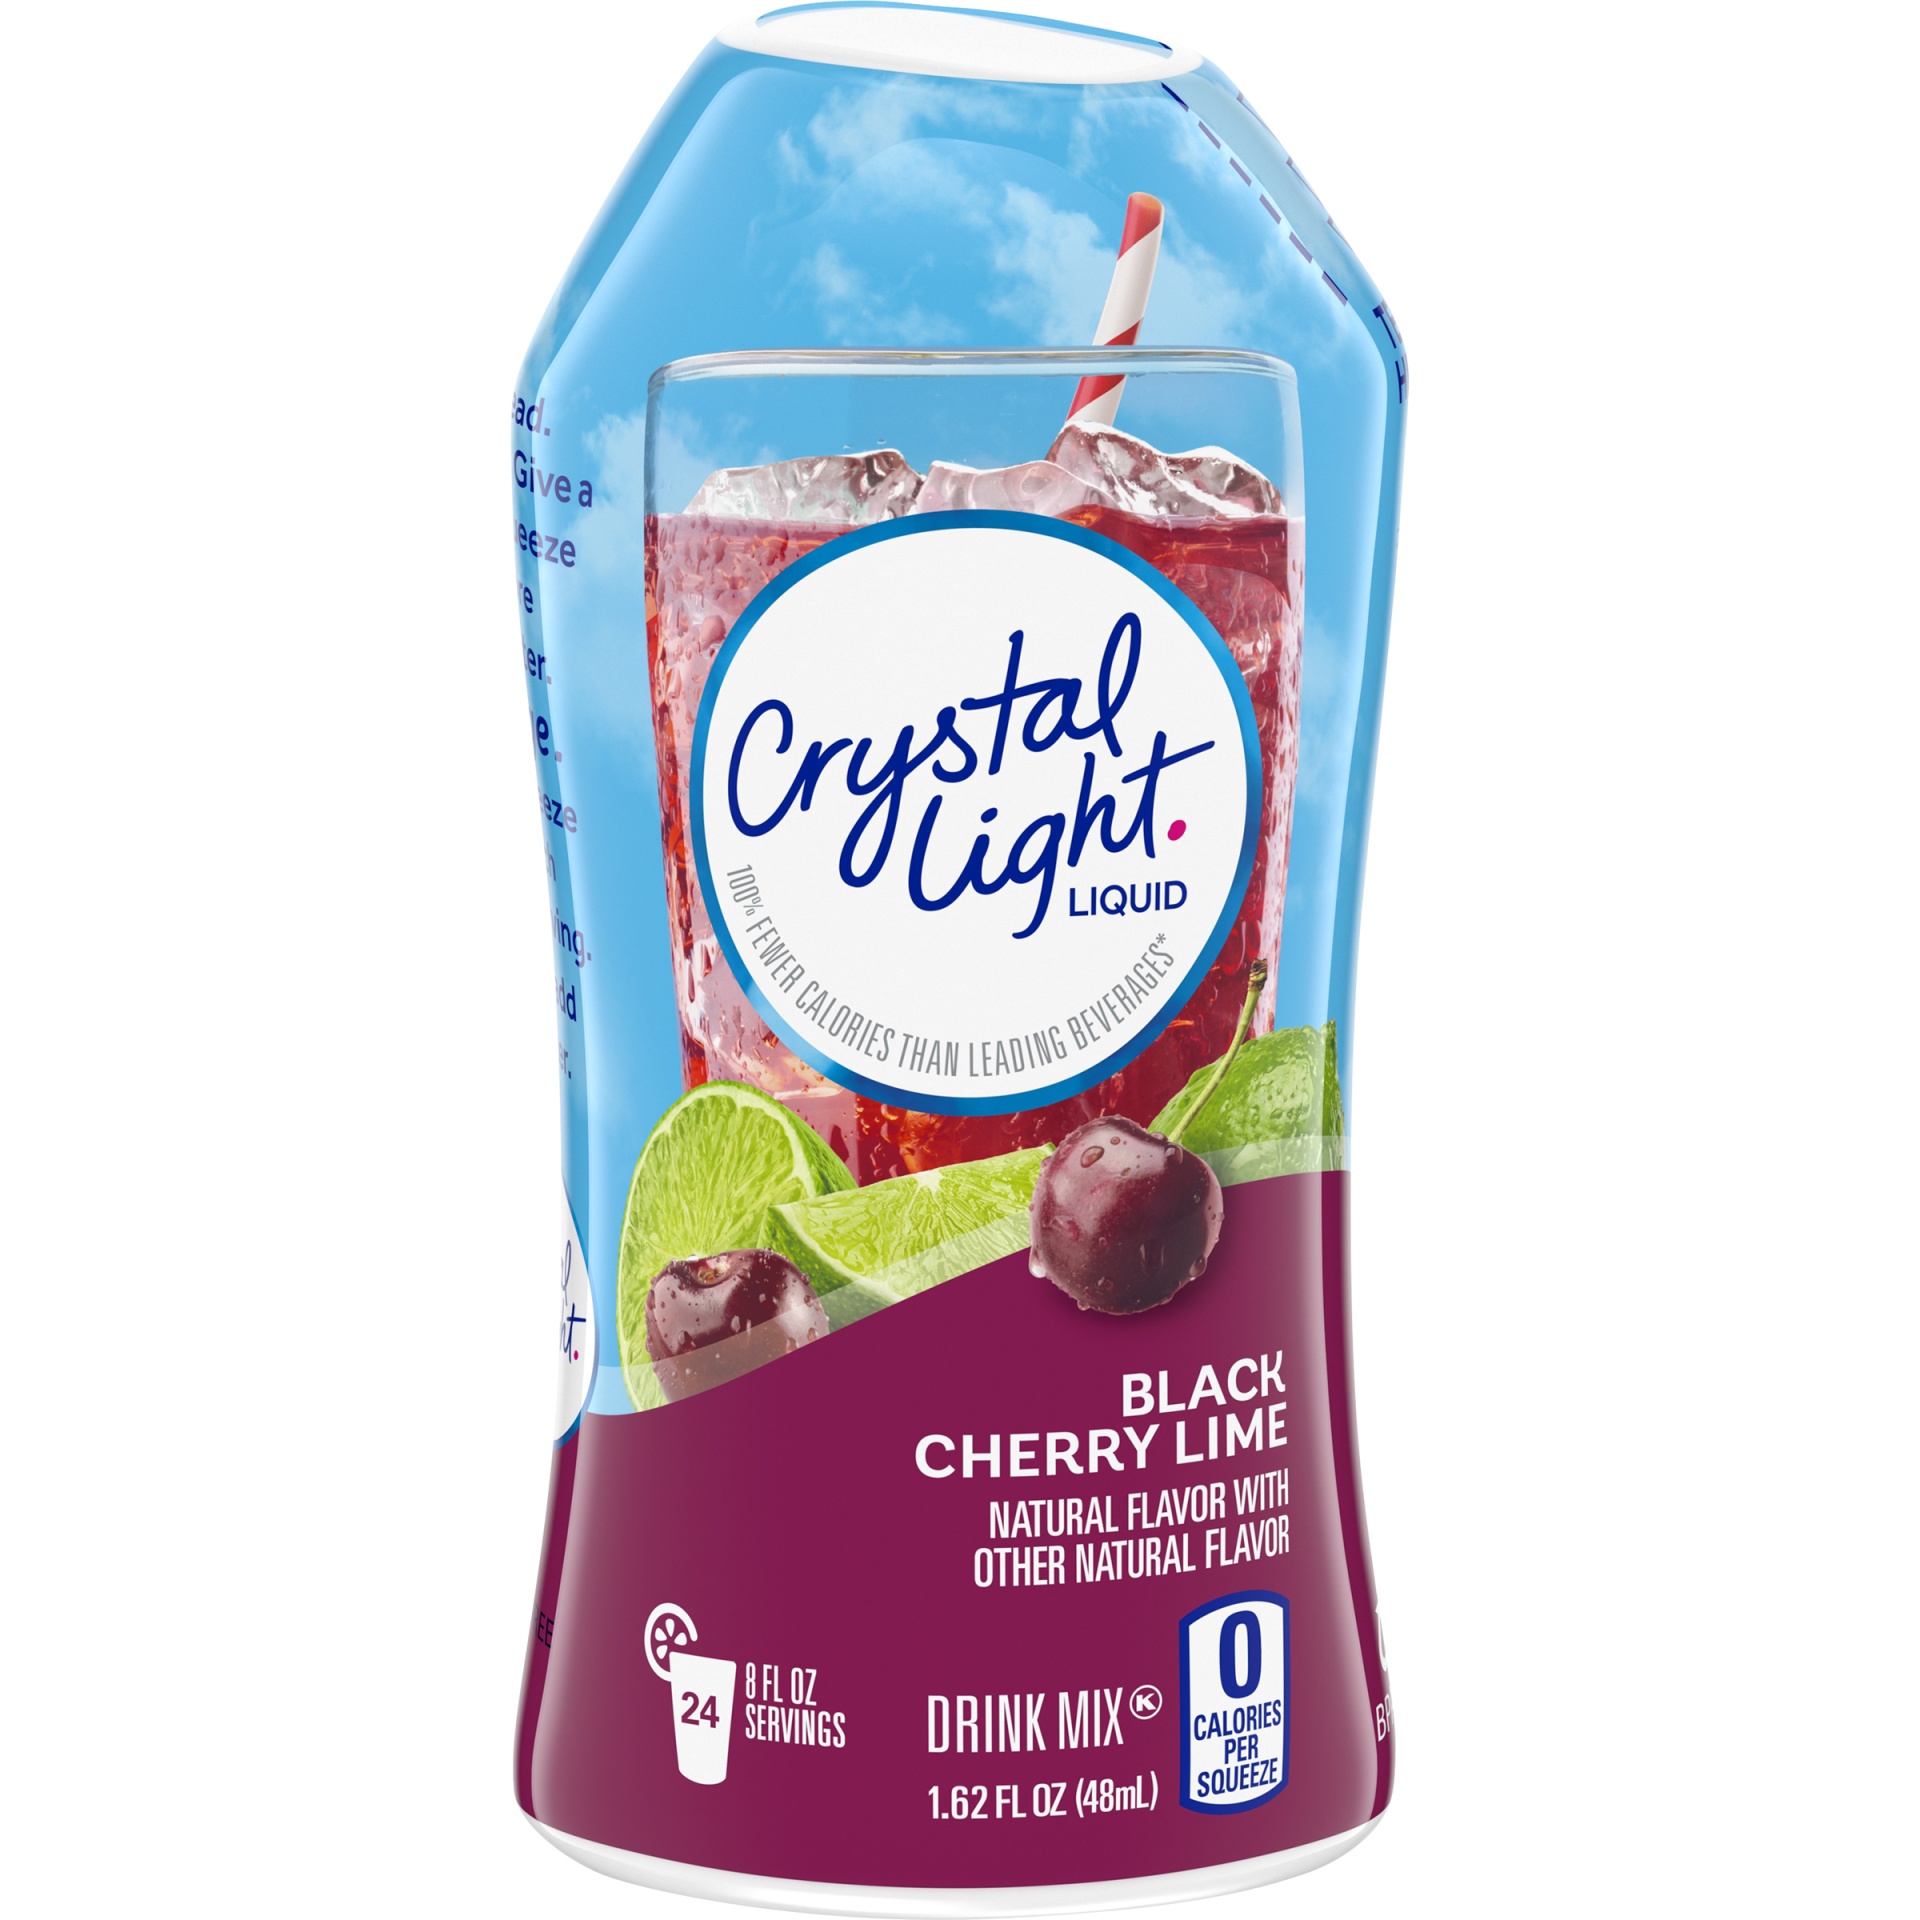 slide 1 of 7, Crystal Light Liquid Black Cherry Lime Naturally Flavored Drink Mix, 1.62 oz